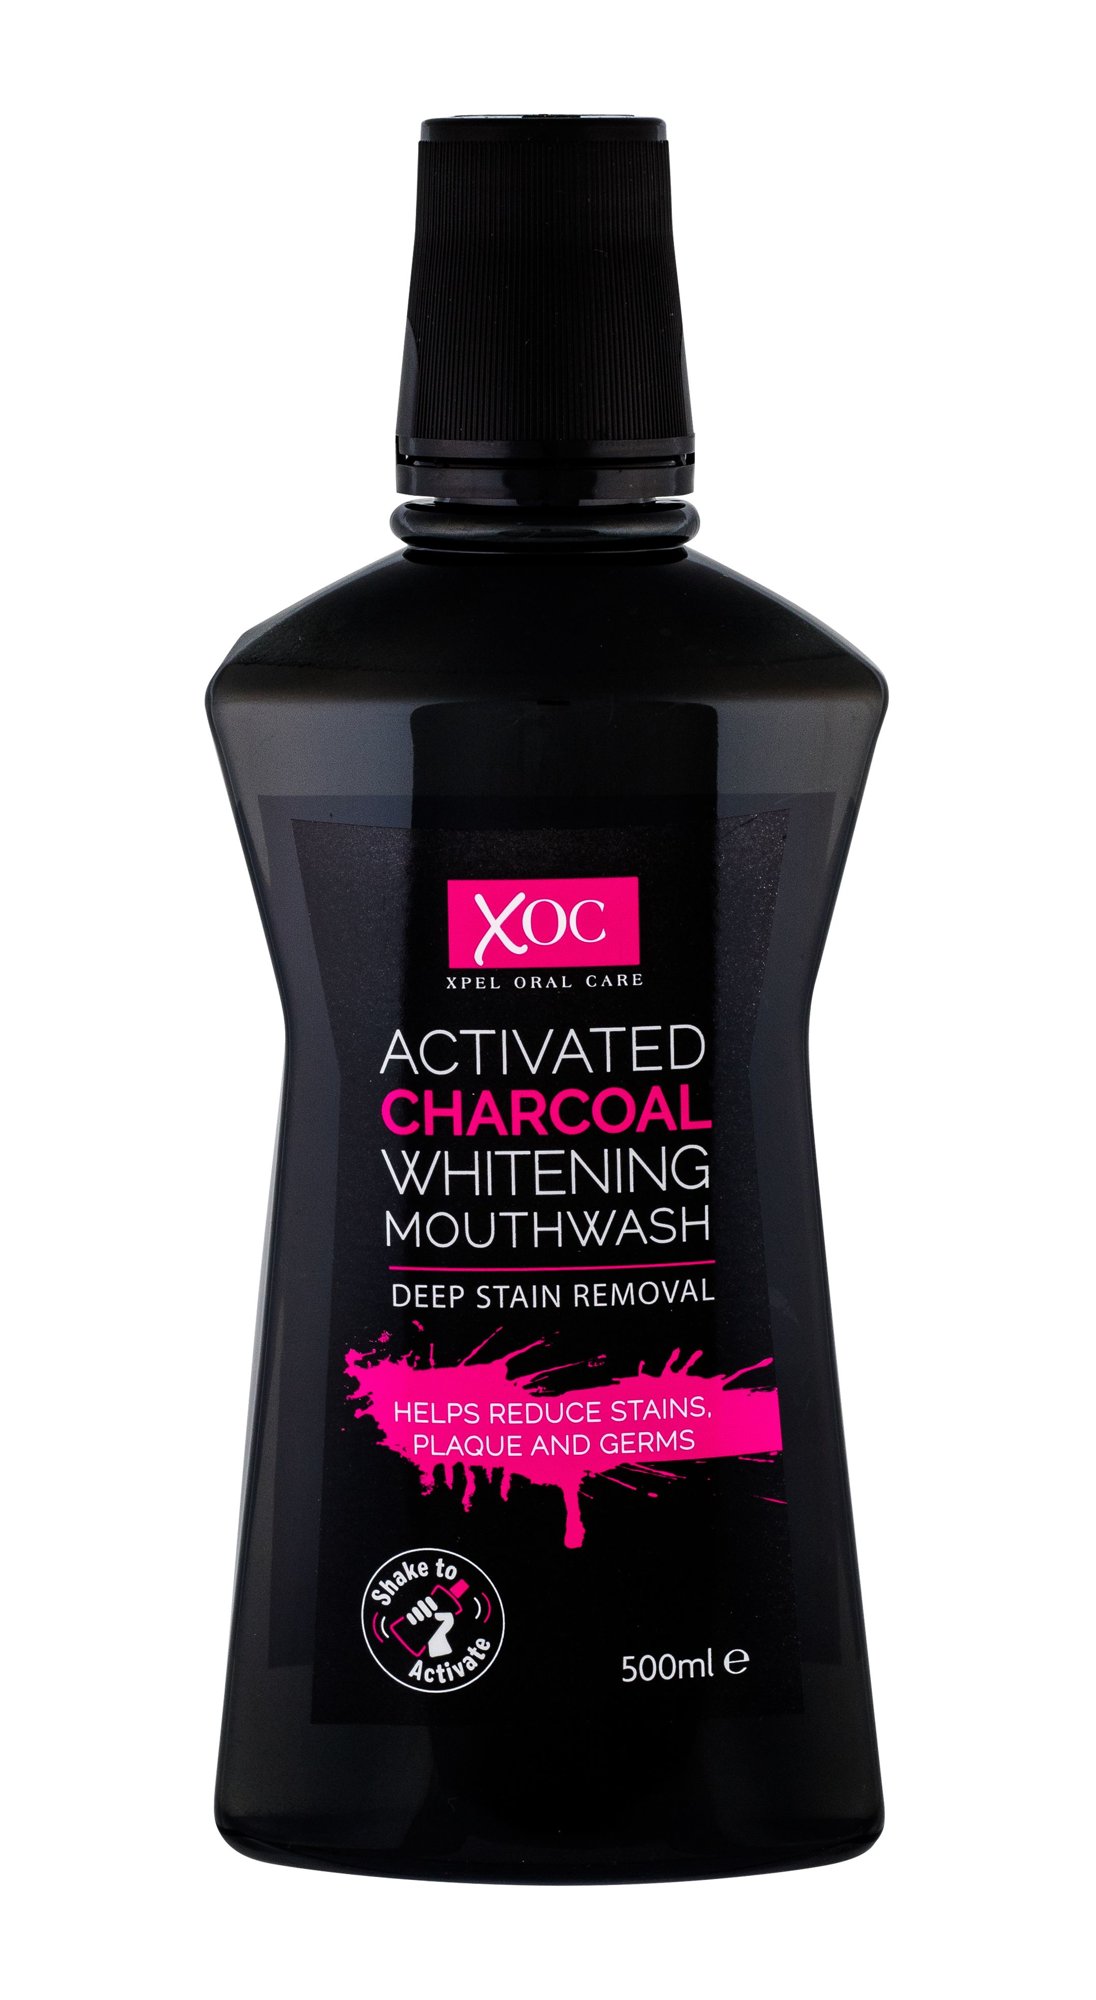 Xpel Oral Care Activated Charcoal dantų skalavimo skystis